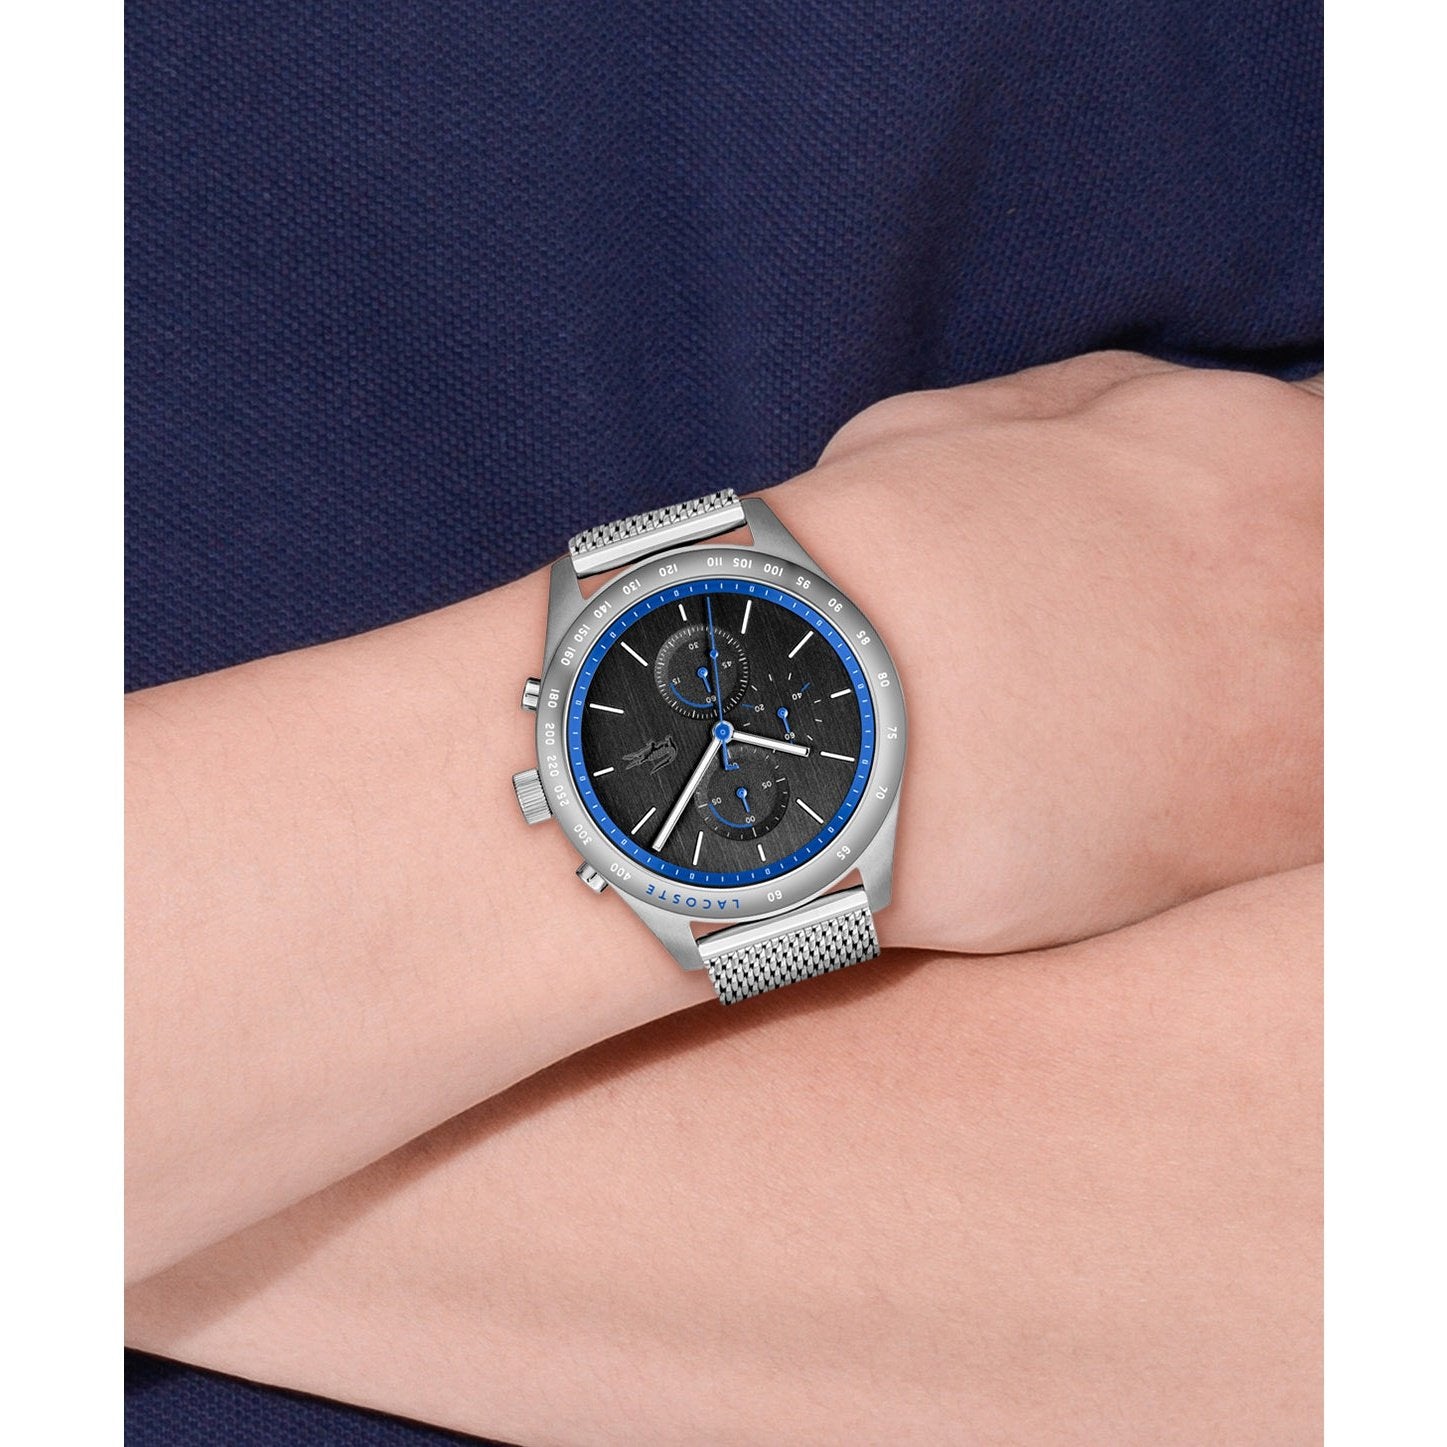 Now Online Shop and For Women Watches Lacoste Men |